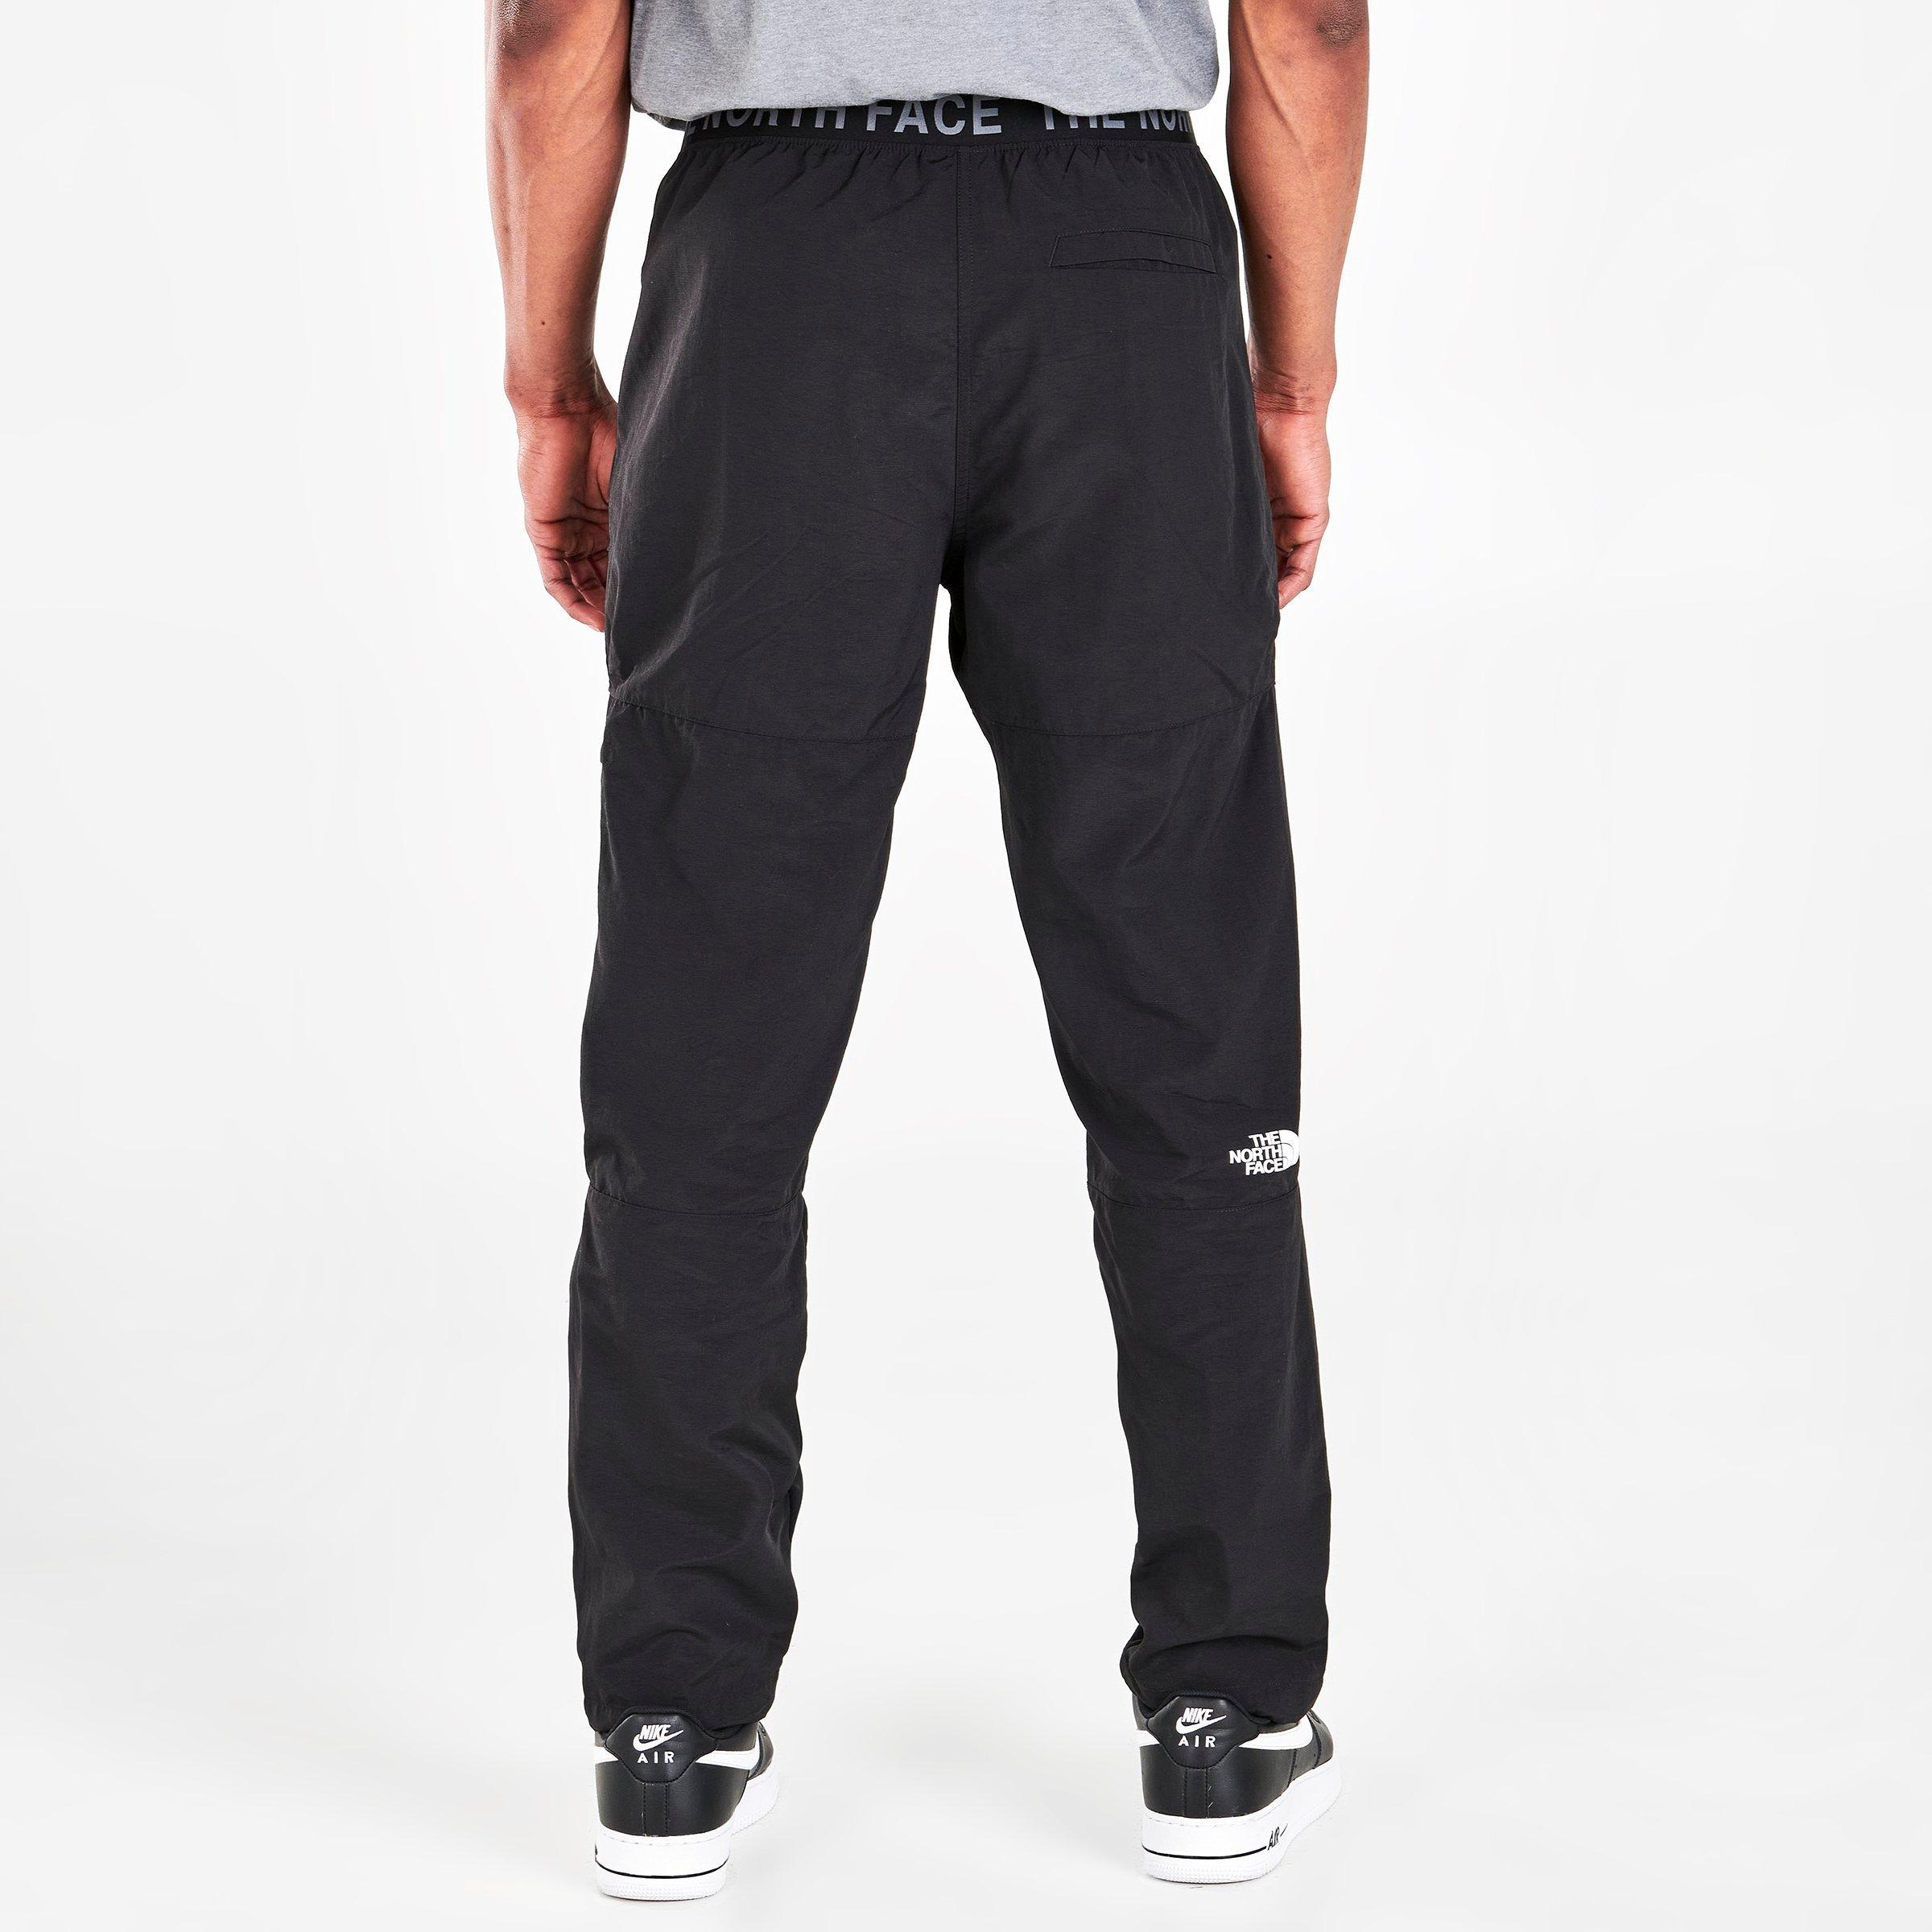 north face z pocket trousers